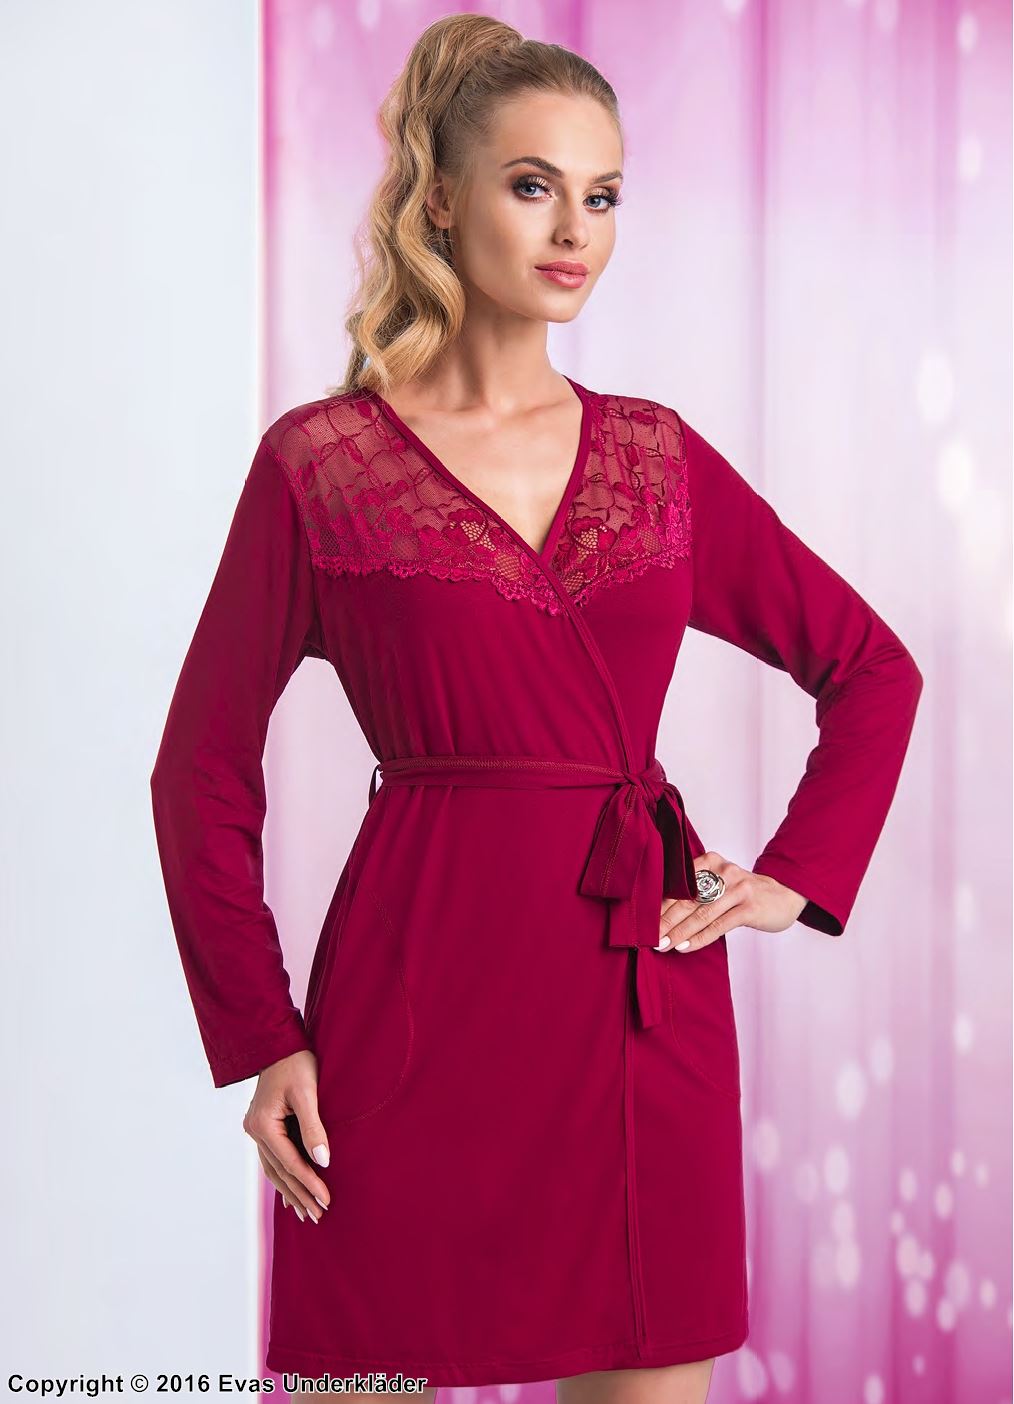 Lounge robe, long sleeves, lace inlays